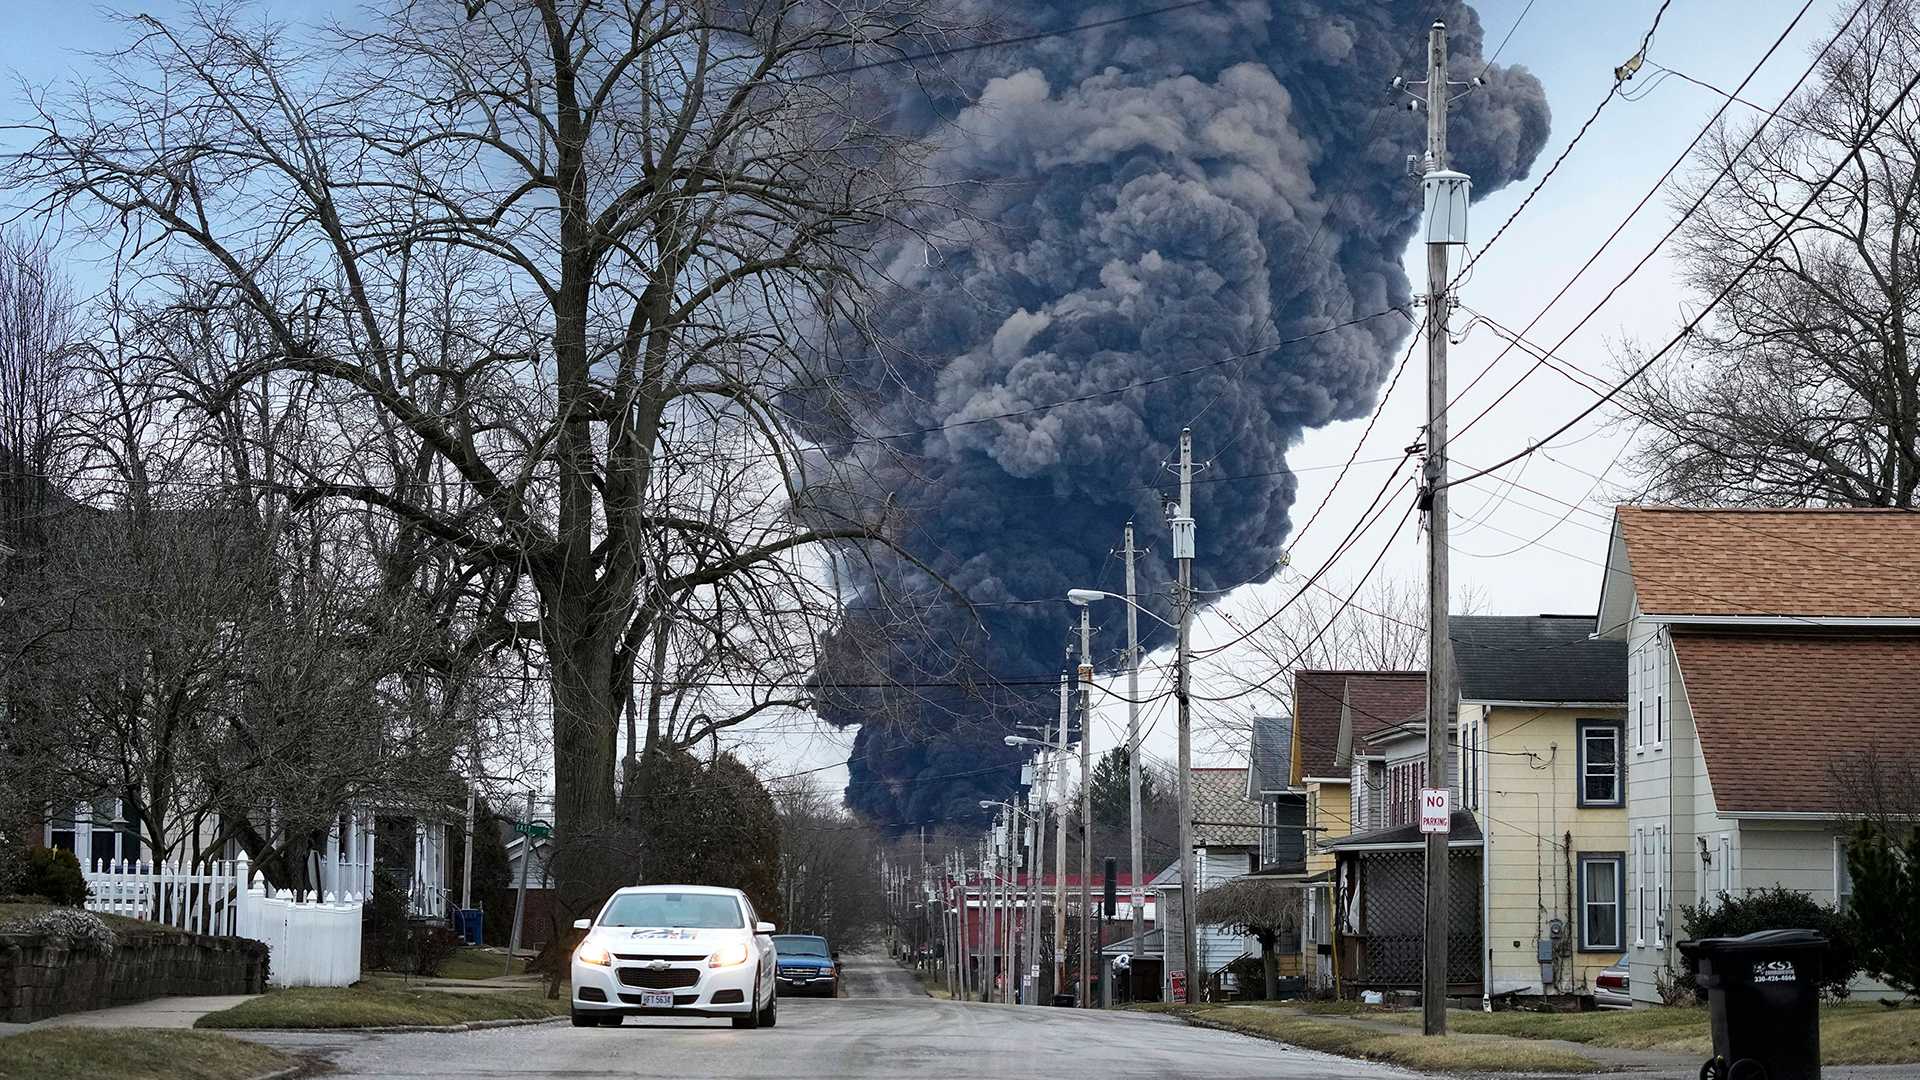 EPA head visits toxic train derailment site in Ohio as residents demand information